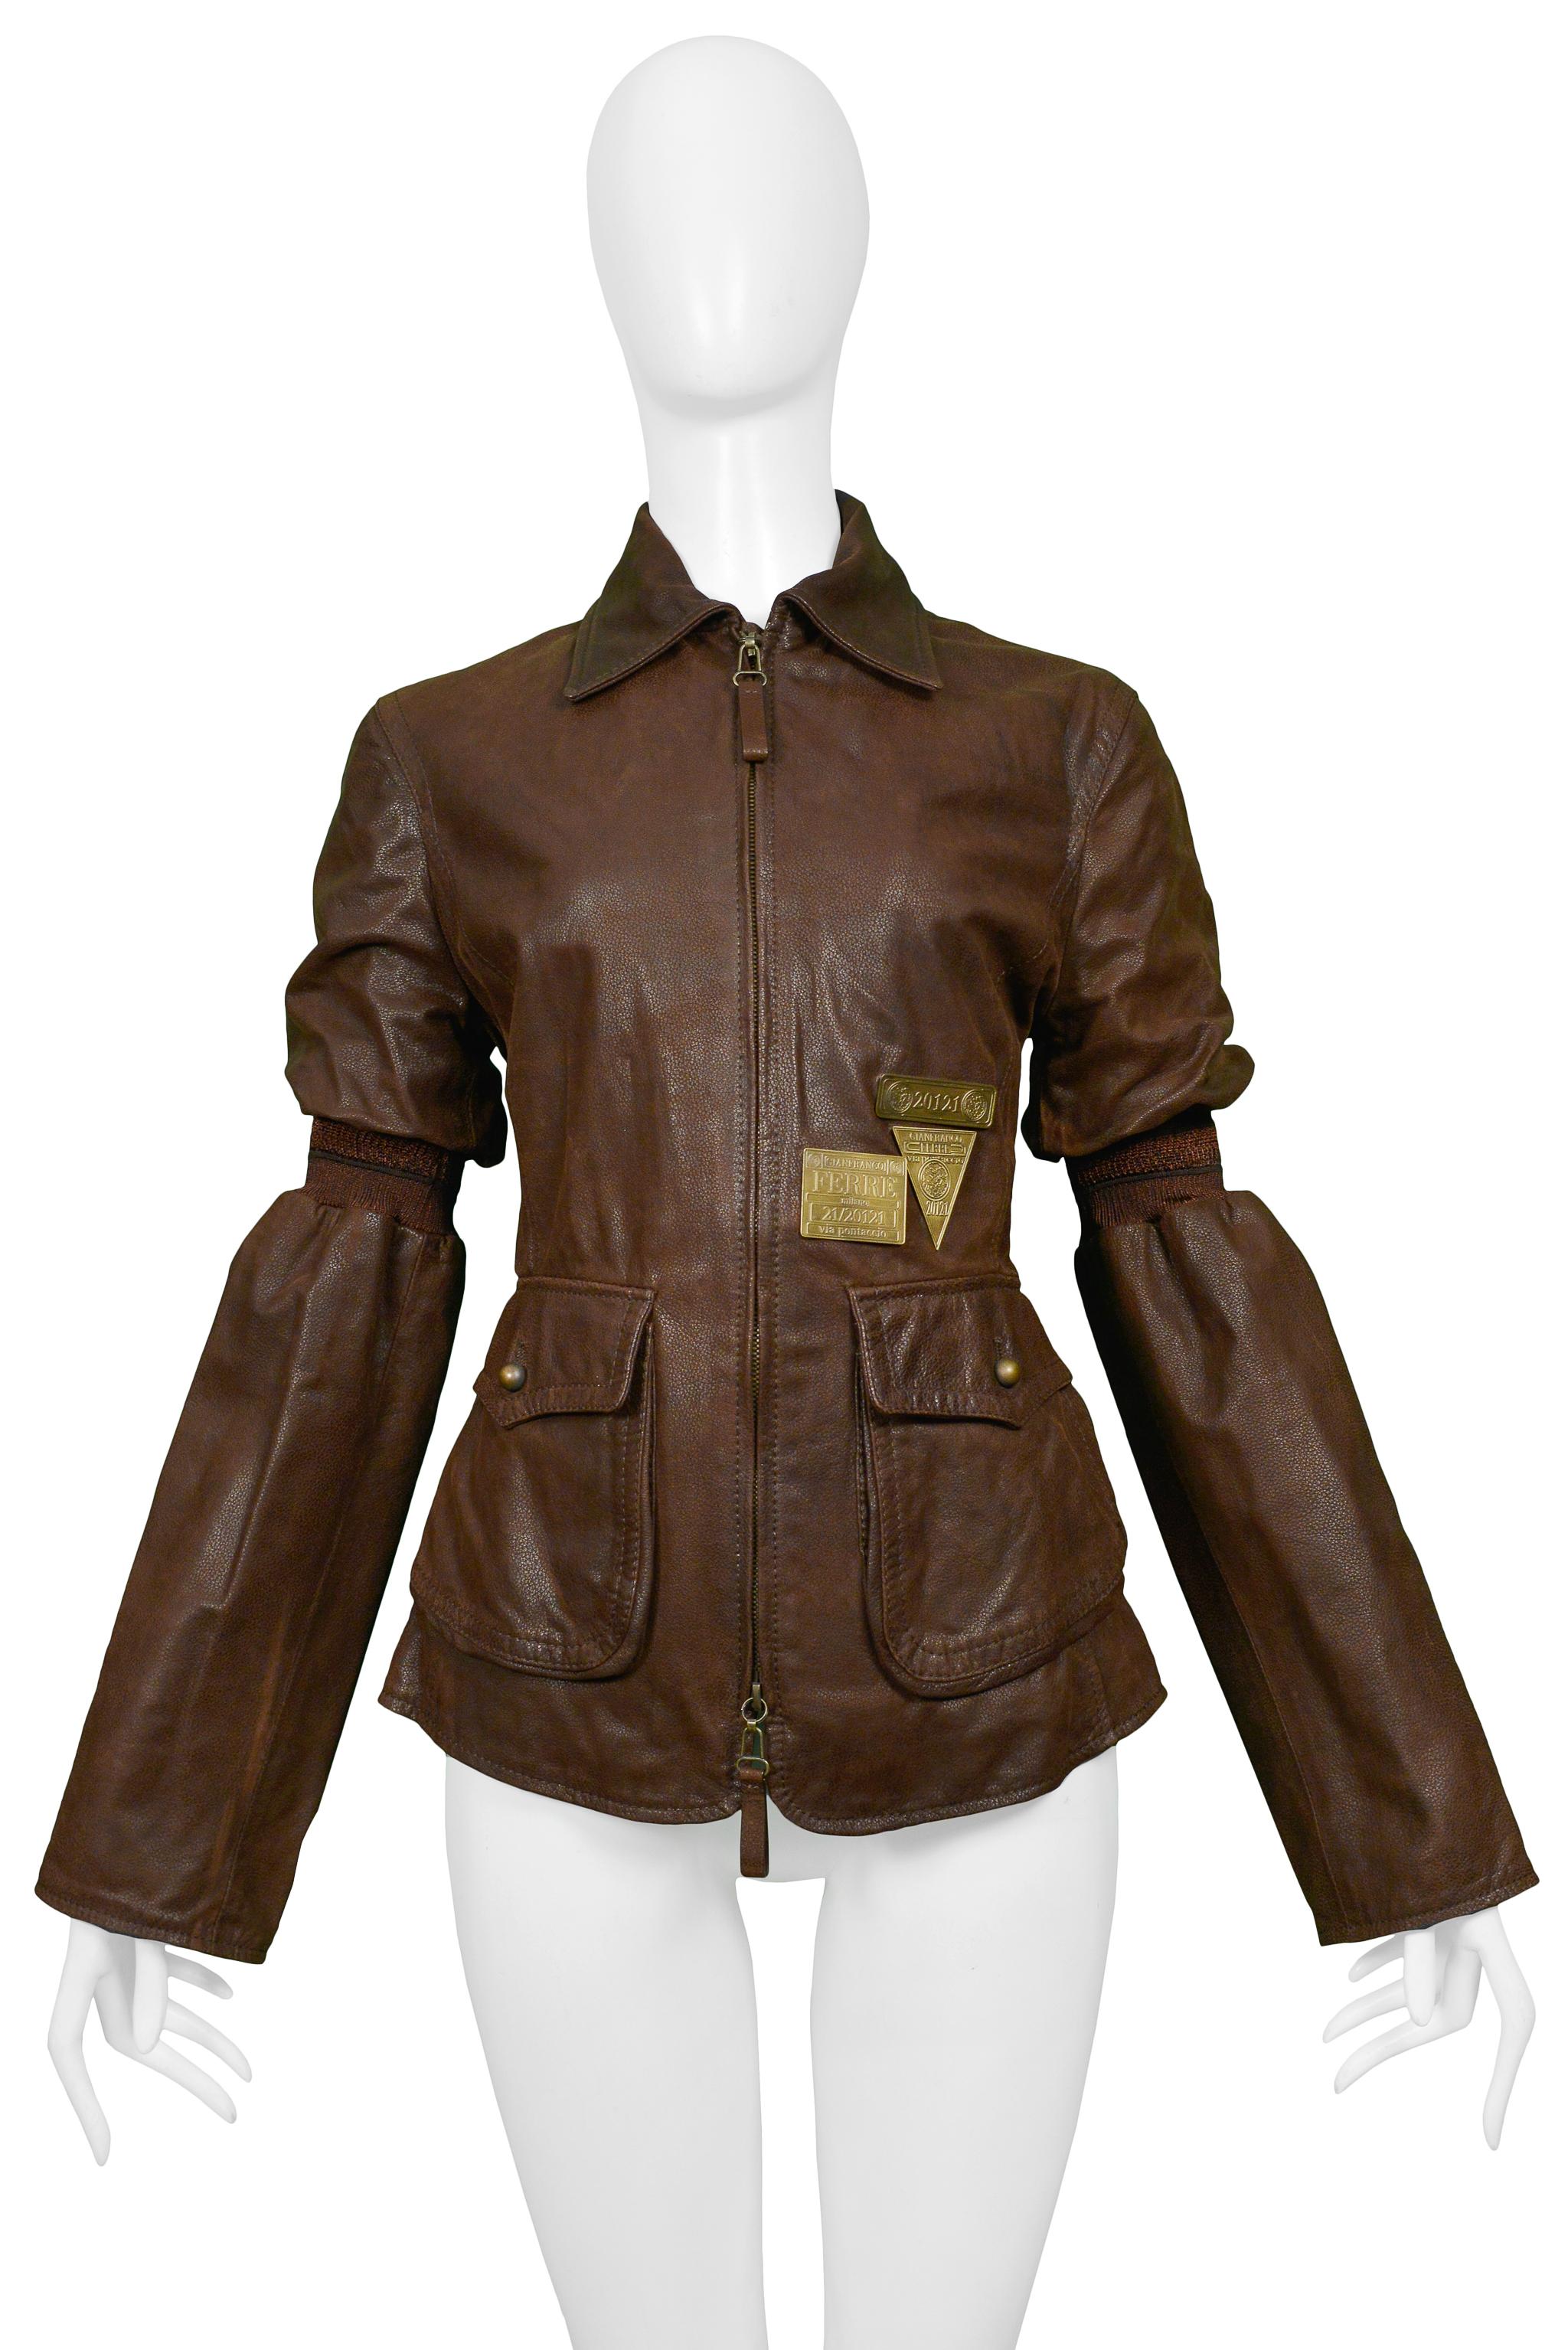 Resurrection is excited to offer a vintage Gianfranco Ferre brown leather aviator jacket featuring two front flap pockets, a two-way center-front zipper with leather pulls, brass hardware, buttons, signature plaques, and striped bands above the